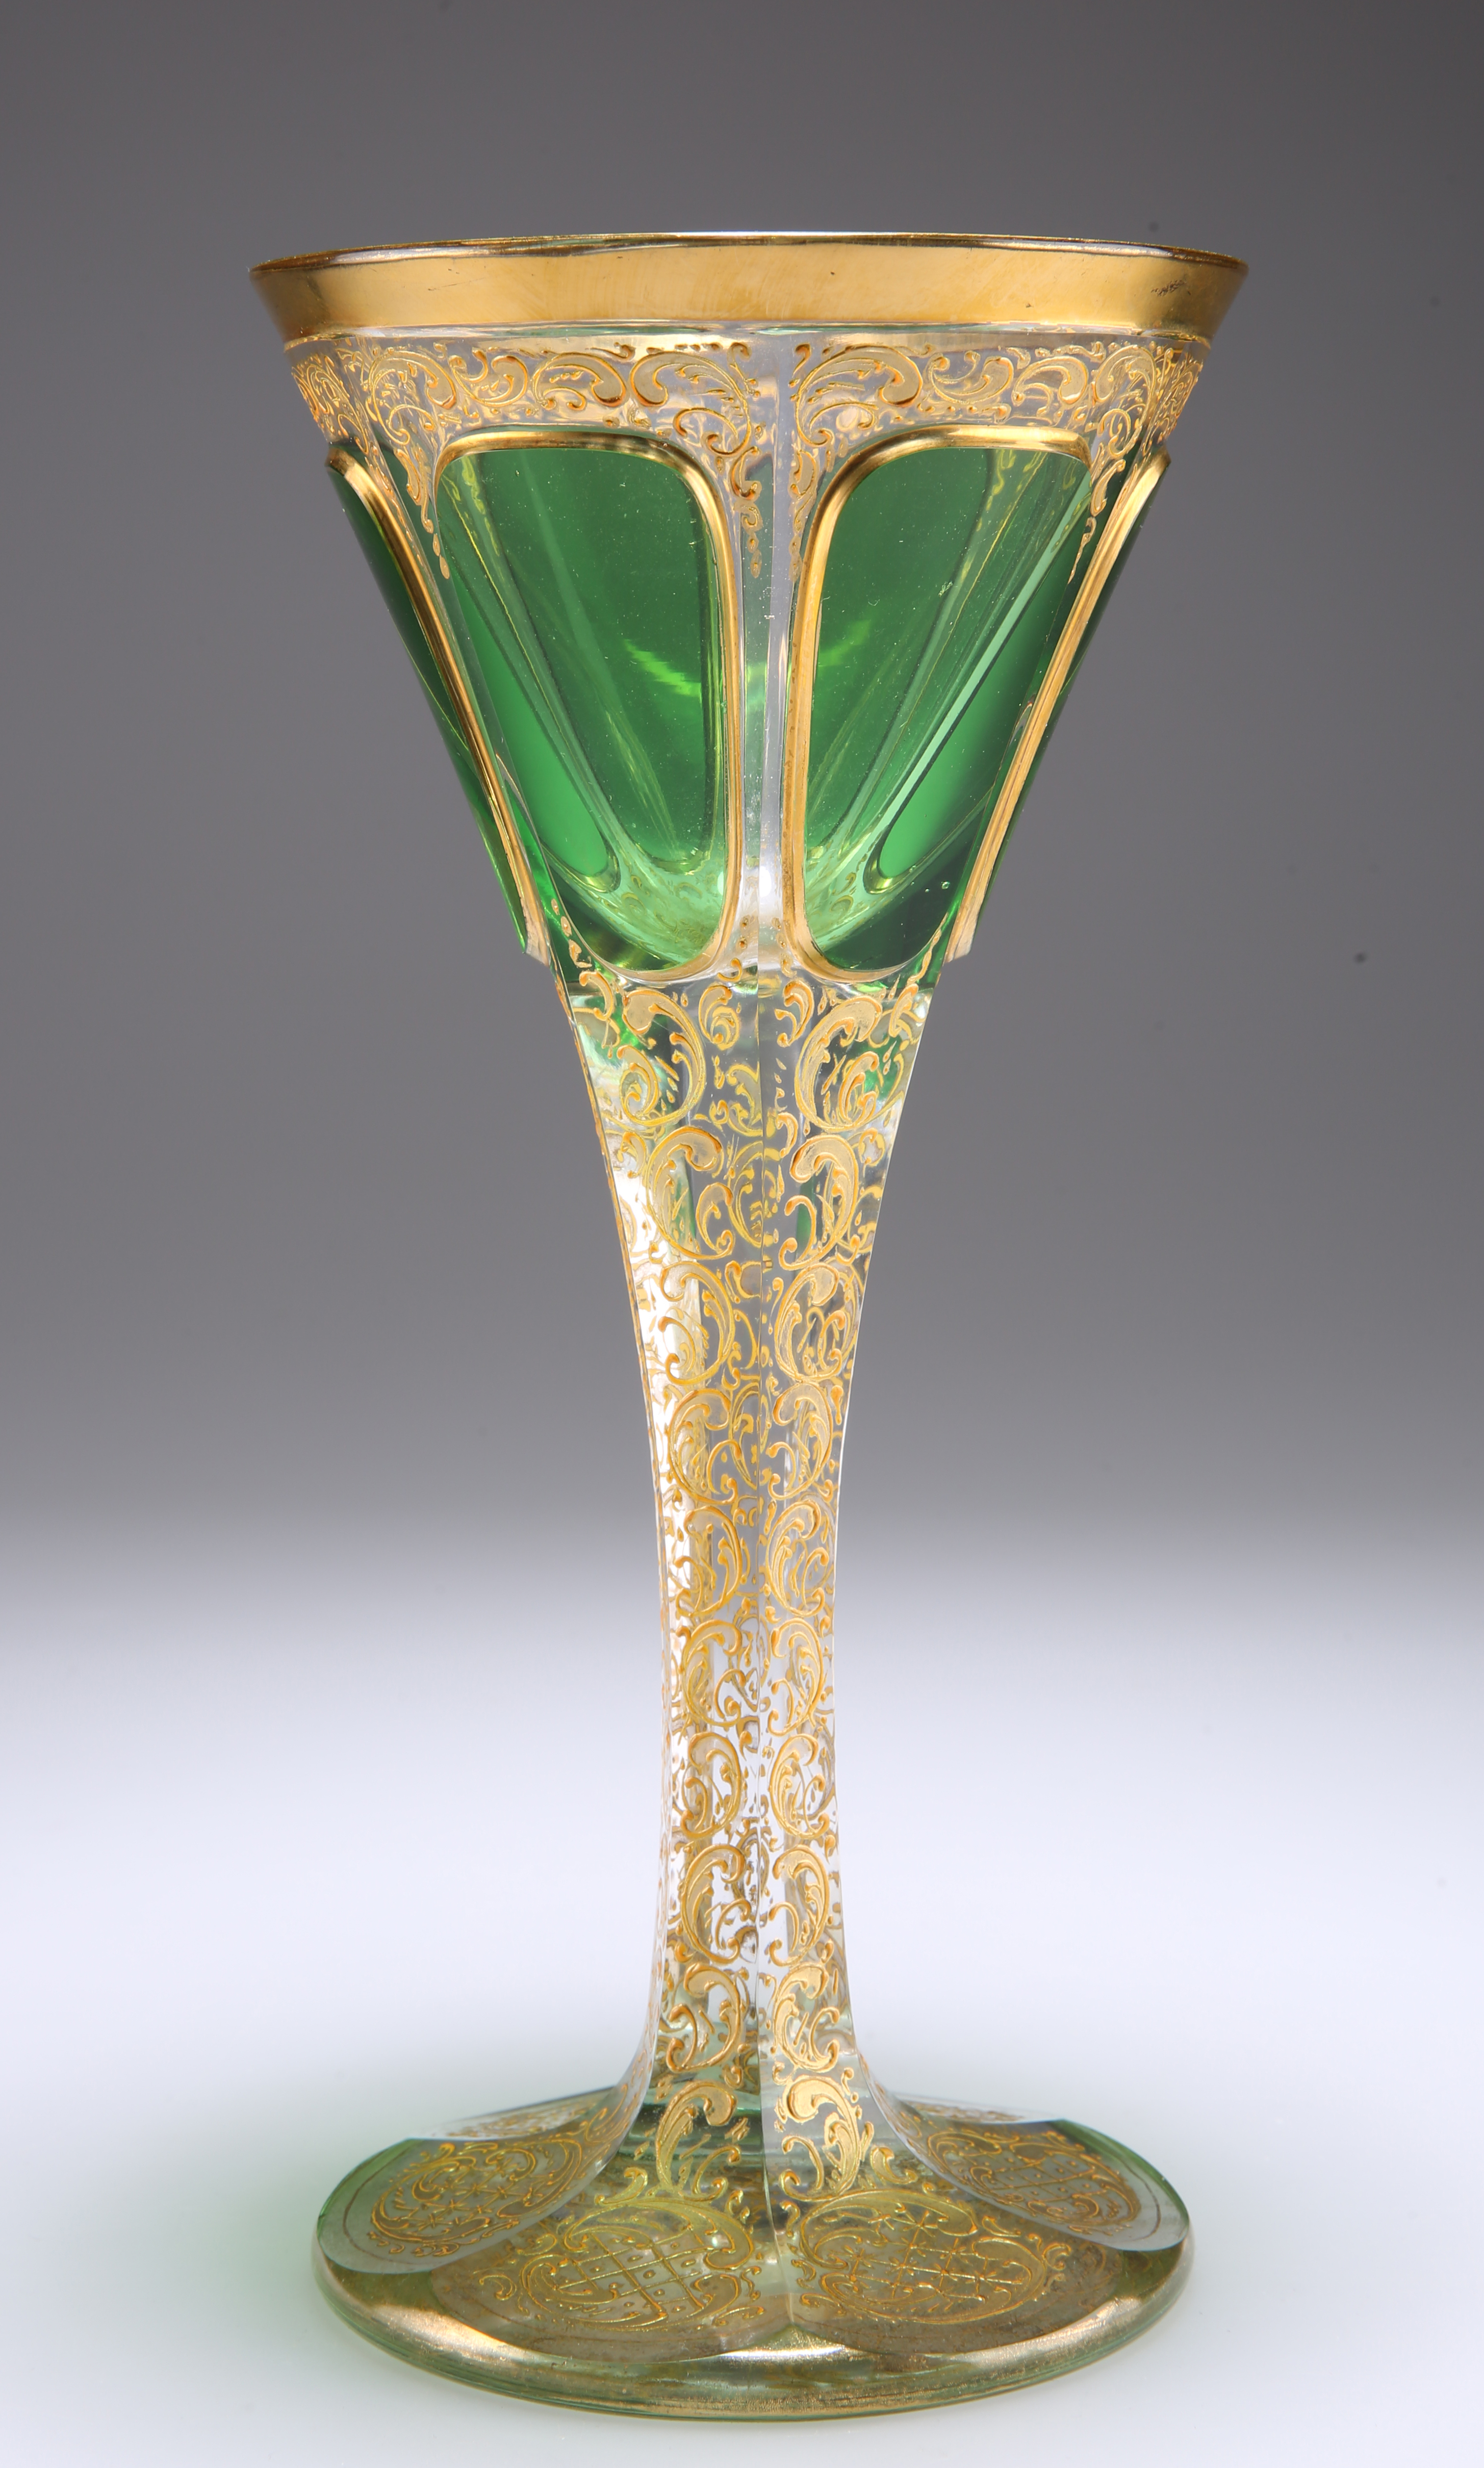 A LARGE CONTINENTAL GLASS GOBLET, CIRCA 1880 - Image 2 of 3